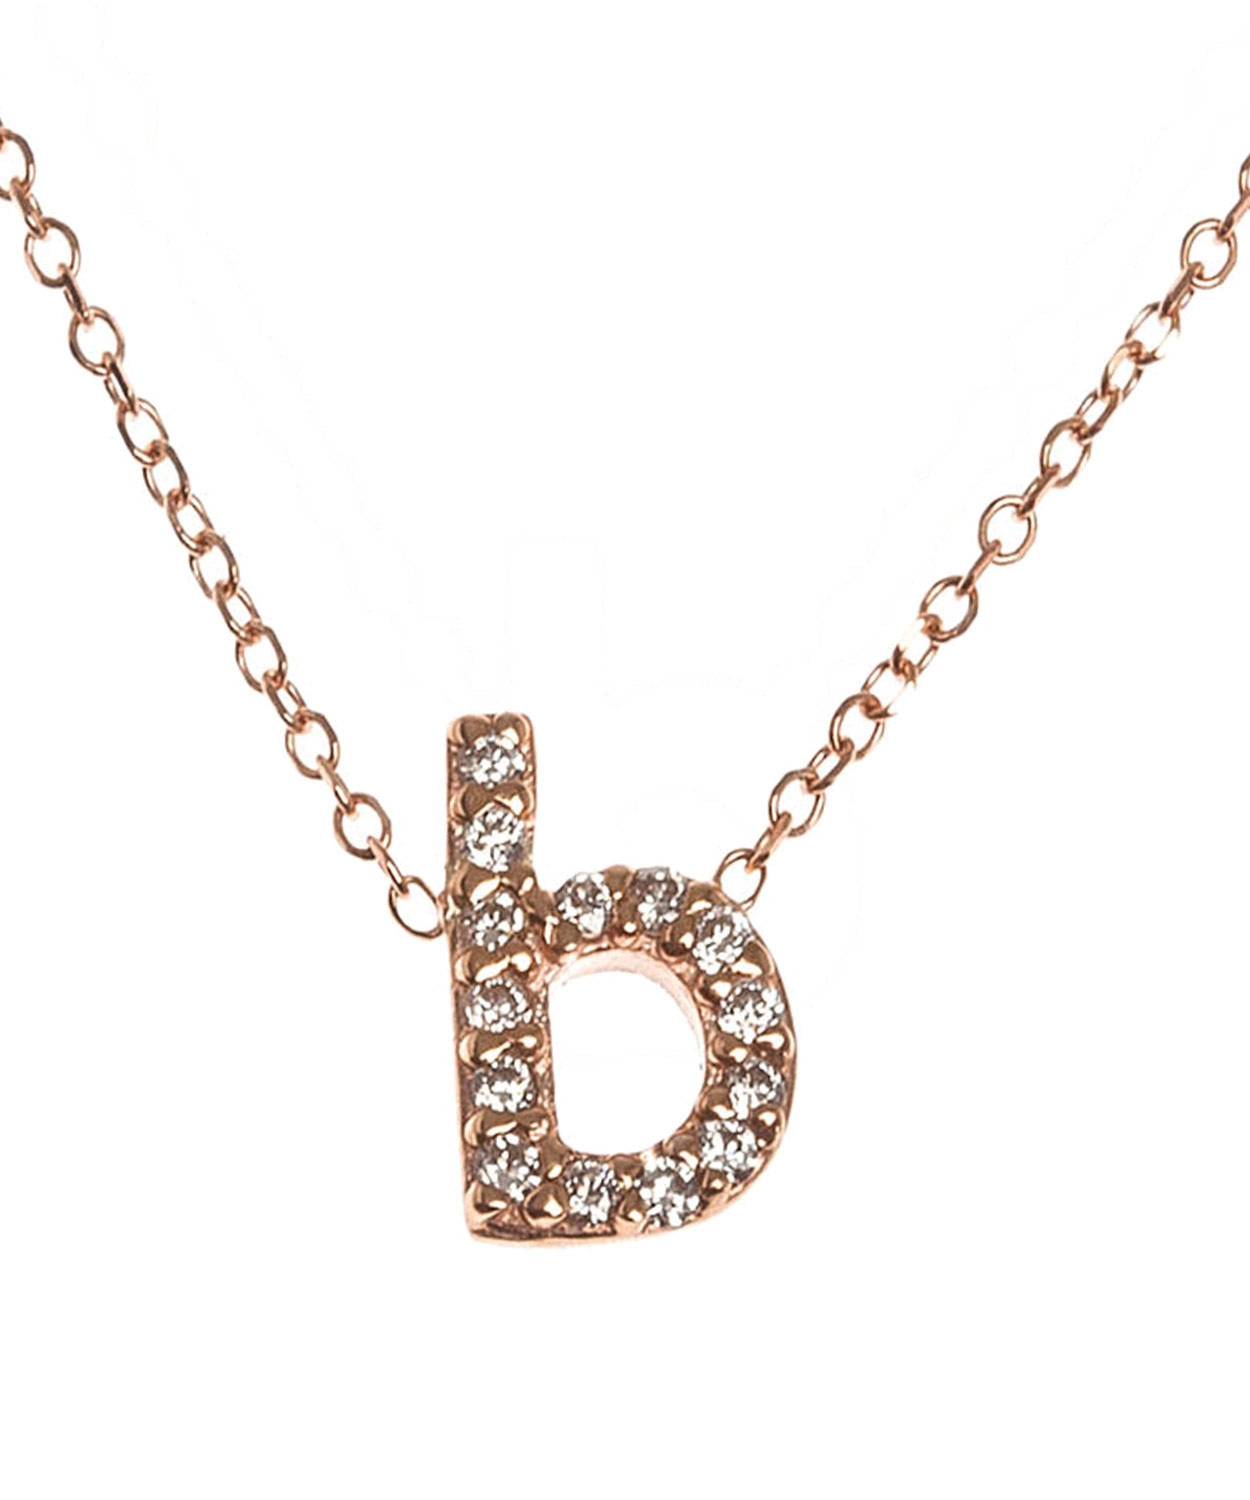 Lyst - Kc Designs Rose Gold Diamond Letter B Necklace in Metallic